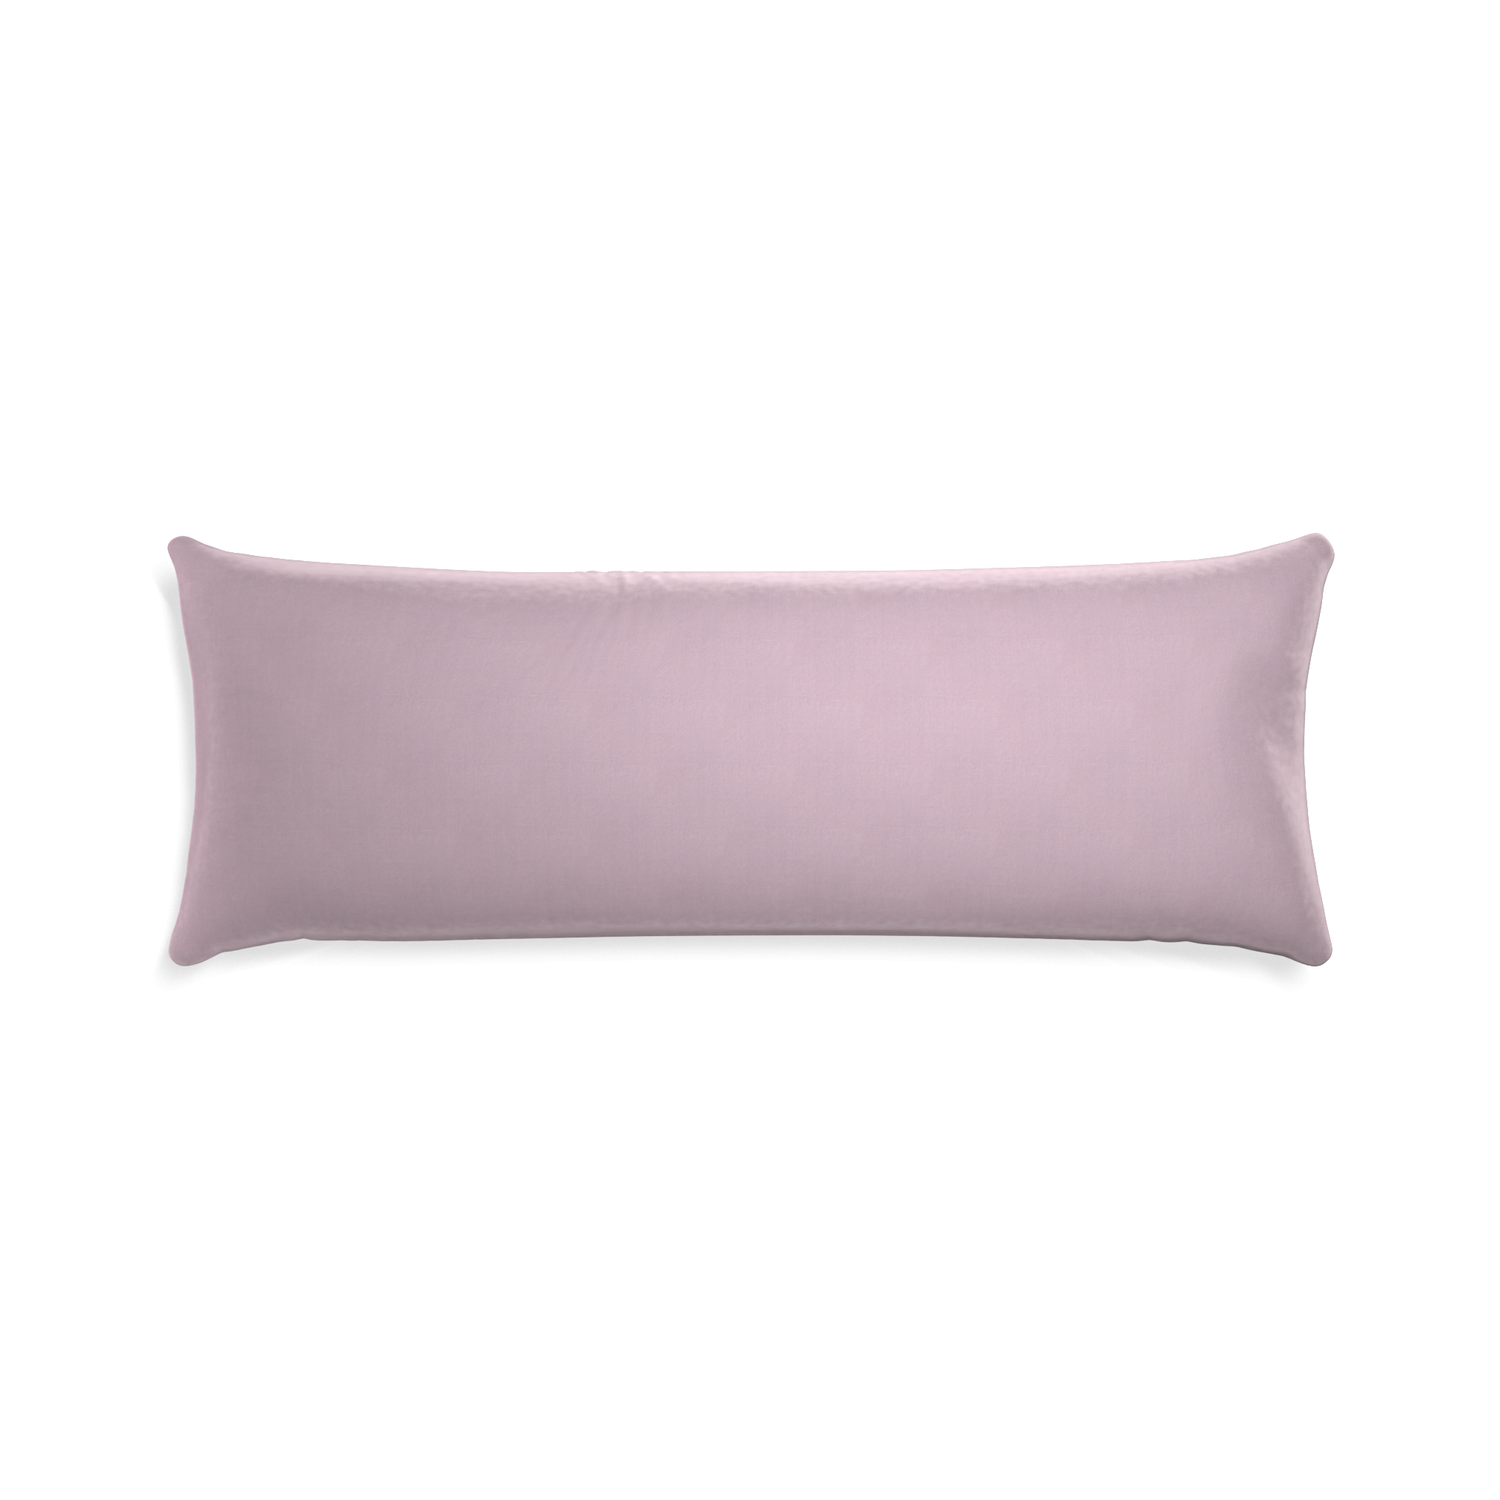 Xl-lumbar lilac velvet custom pillow with none on white background